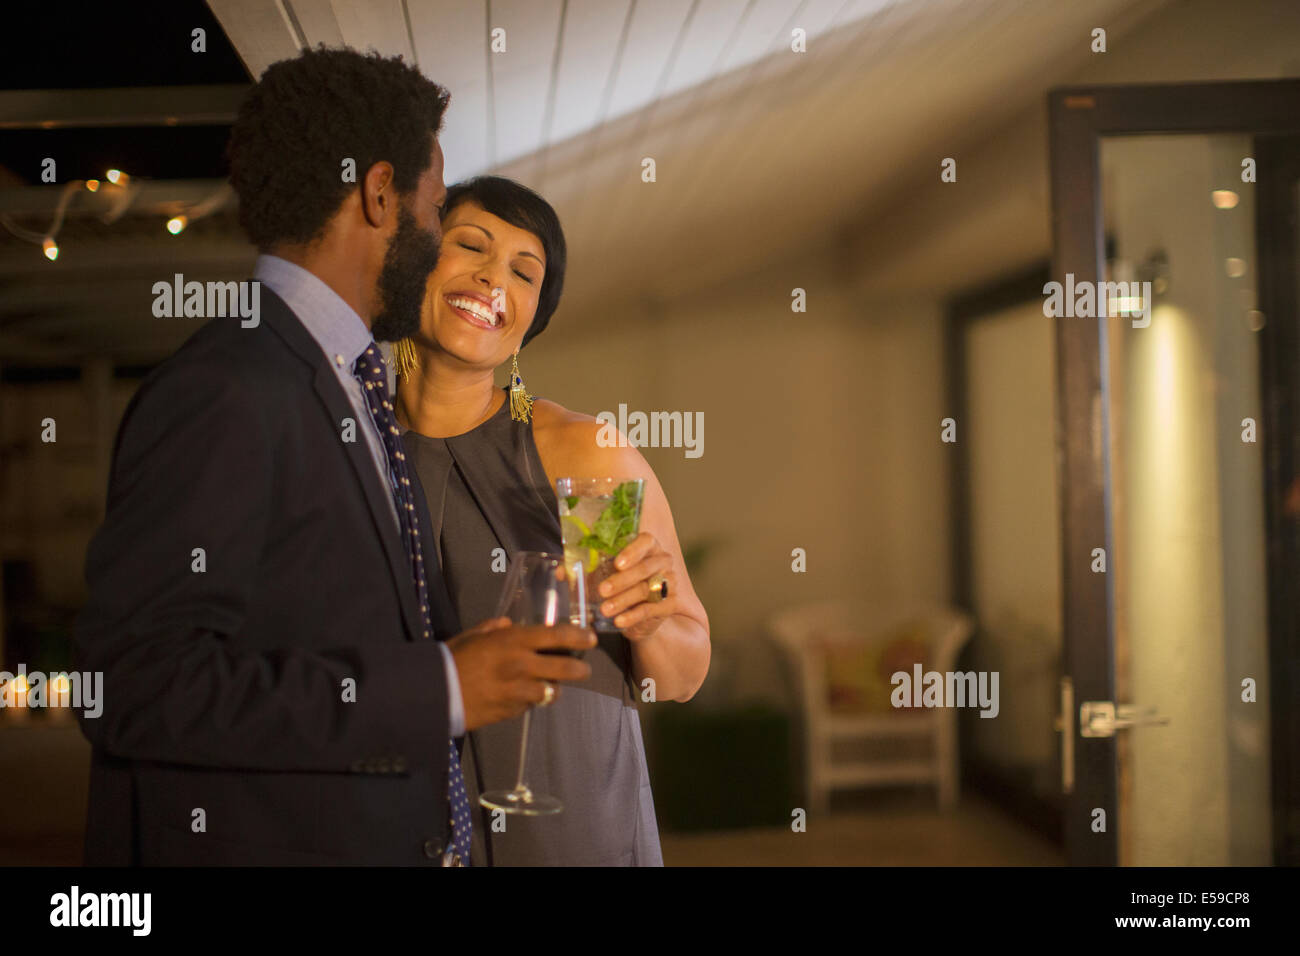 Couple kissing at party Banque D'Images